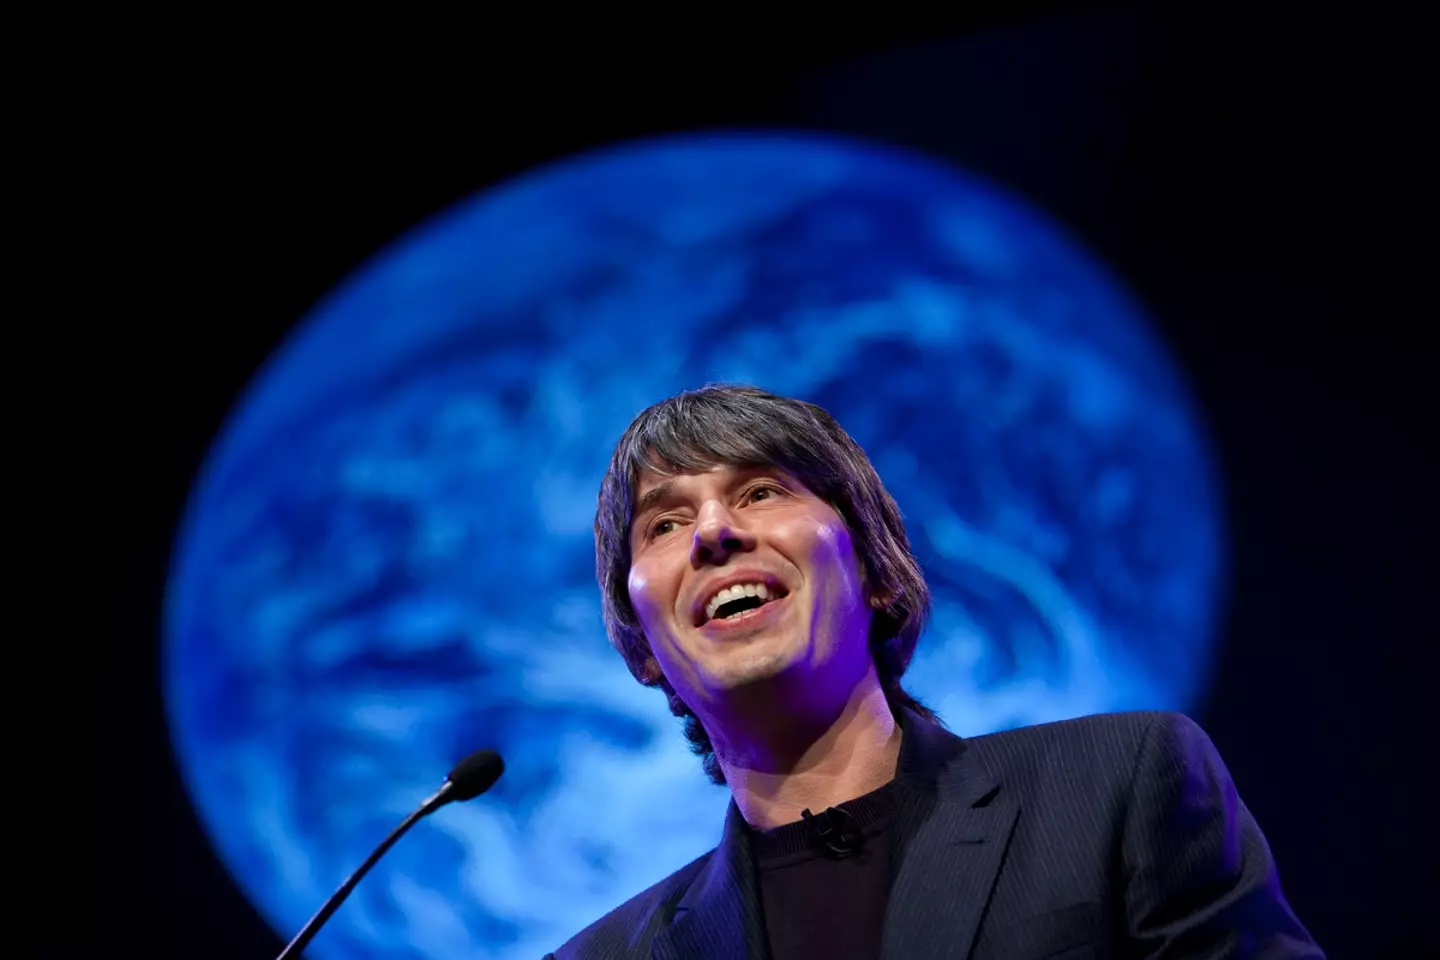 Professor Brian Cox slammed the Flat Earth theory as 'drivel'. (David Levenson/Getty Images)